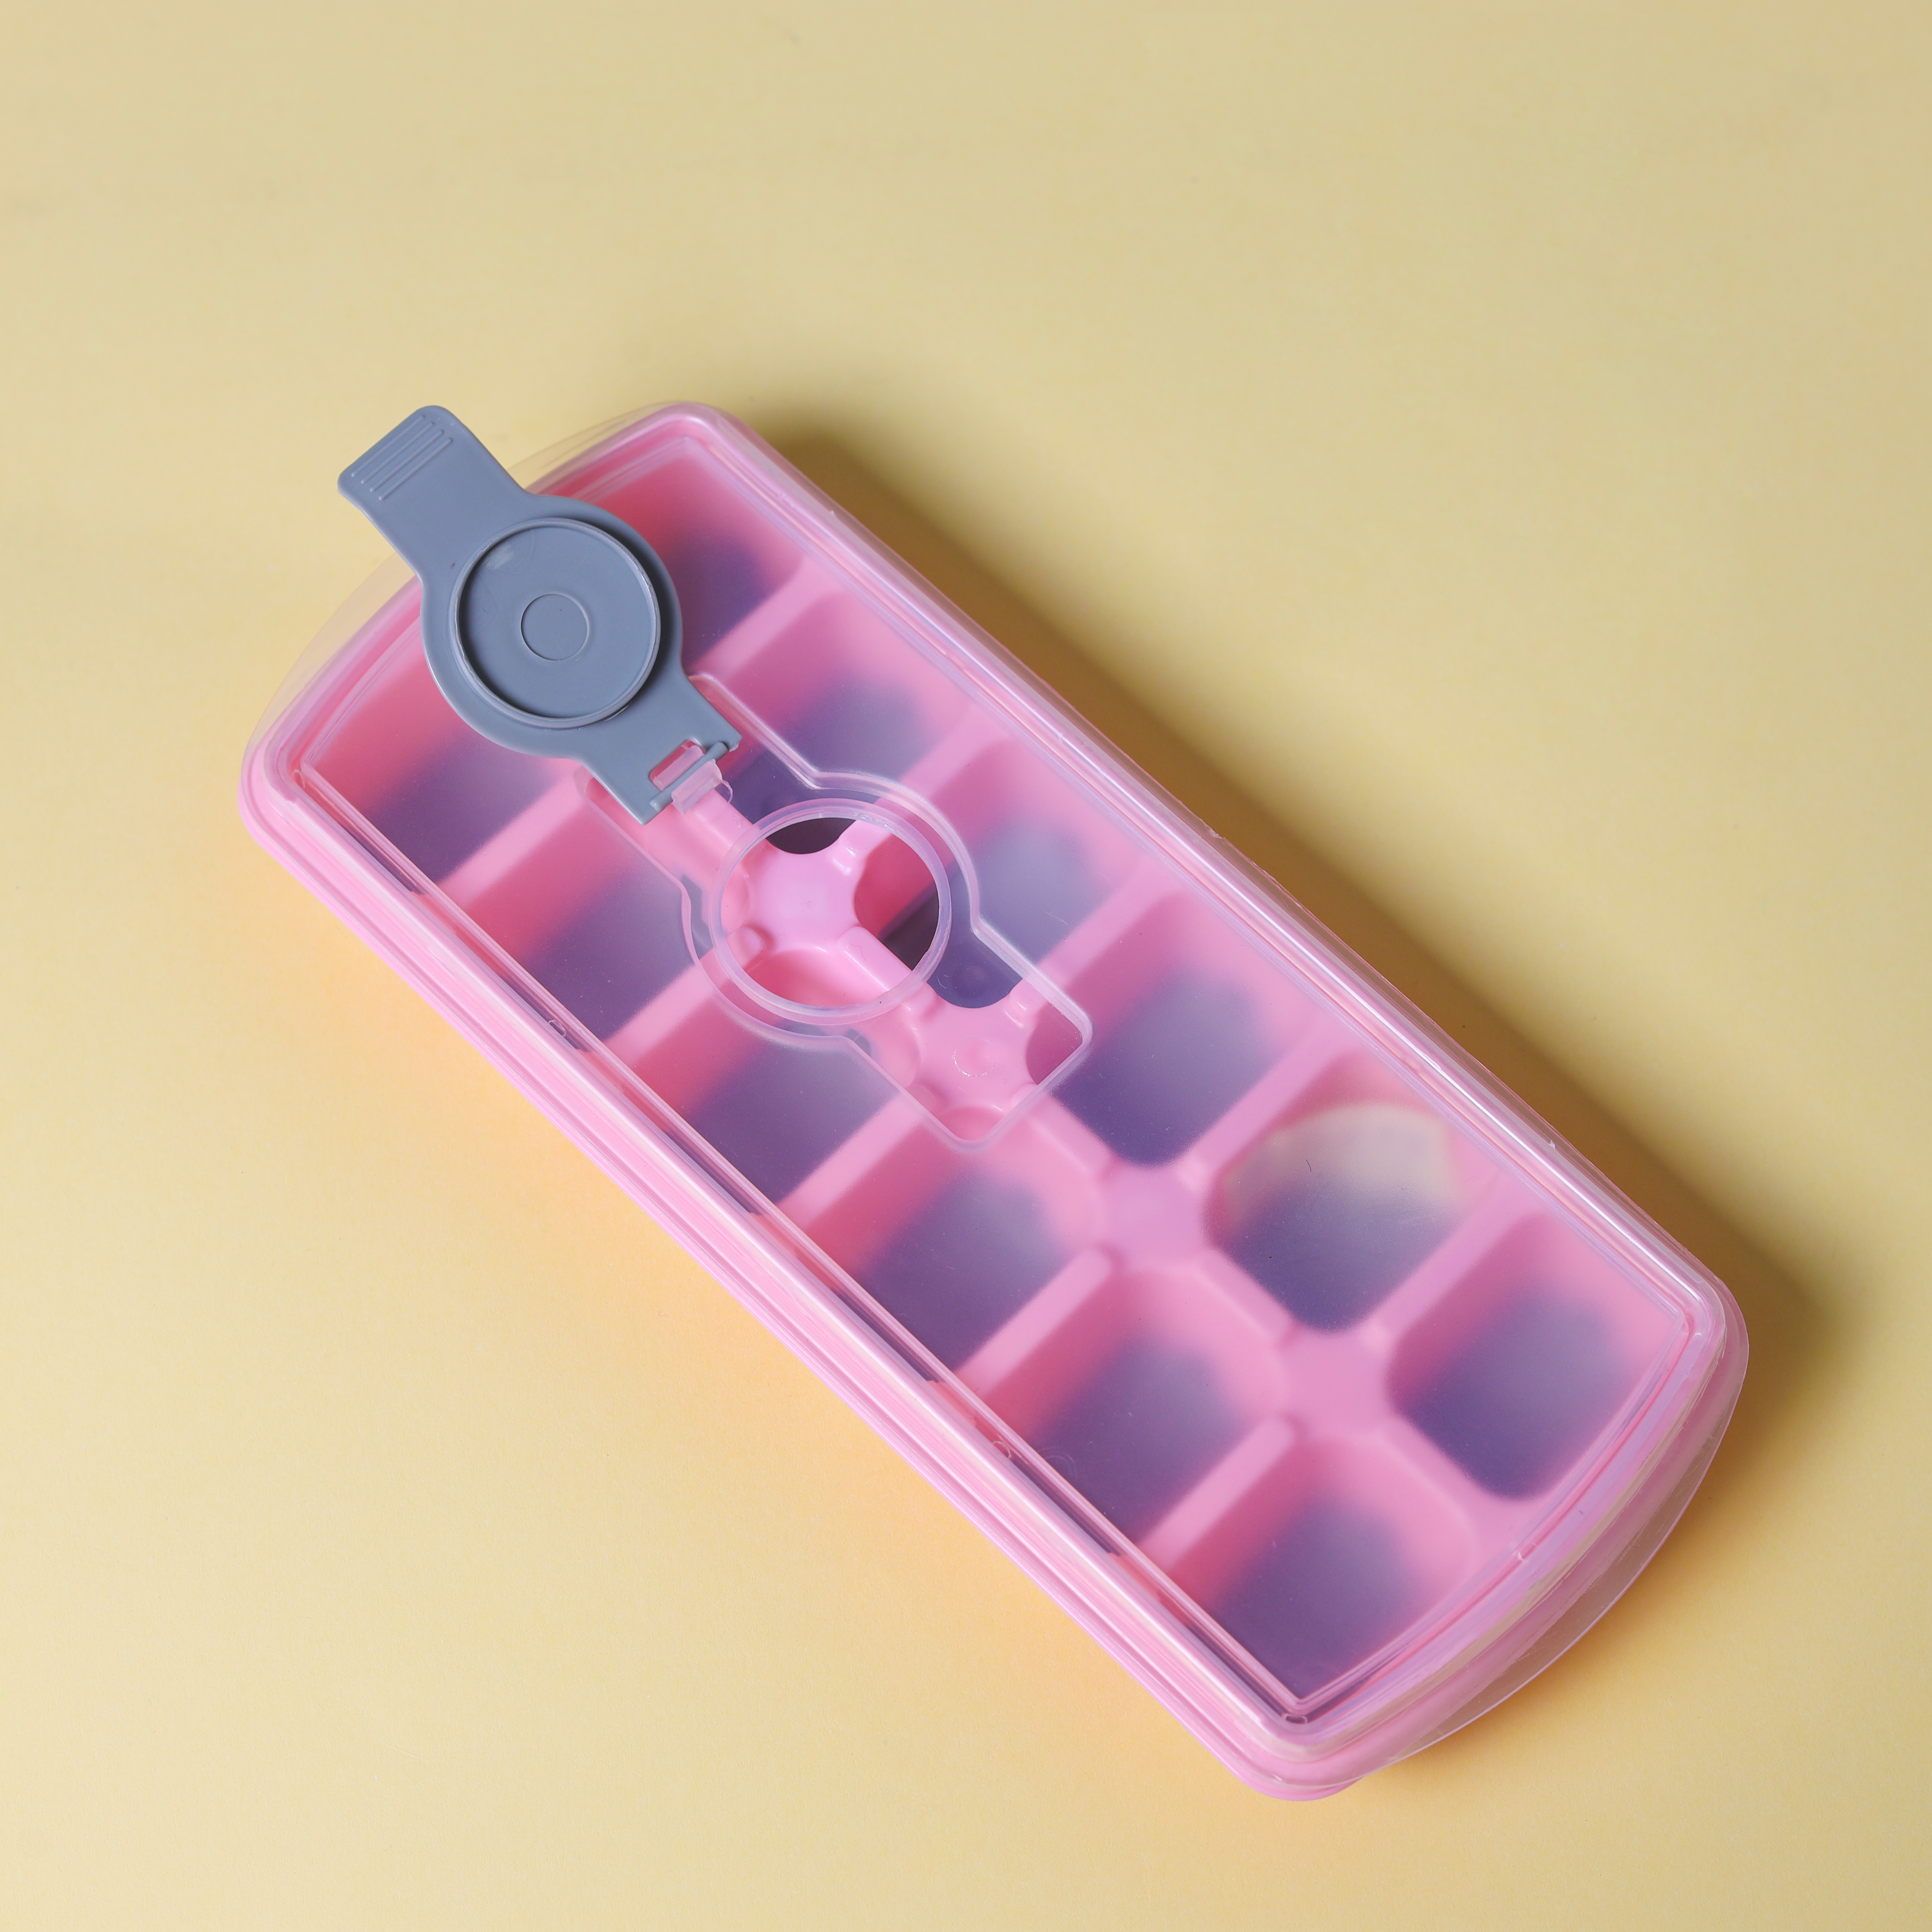 Royal Ford Push And Take Smart Ice Cube Tray